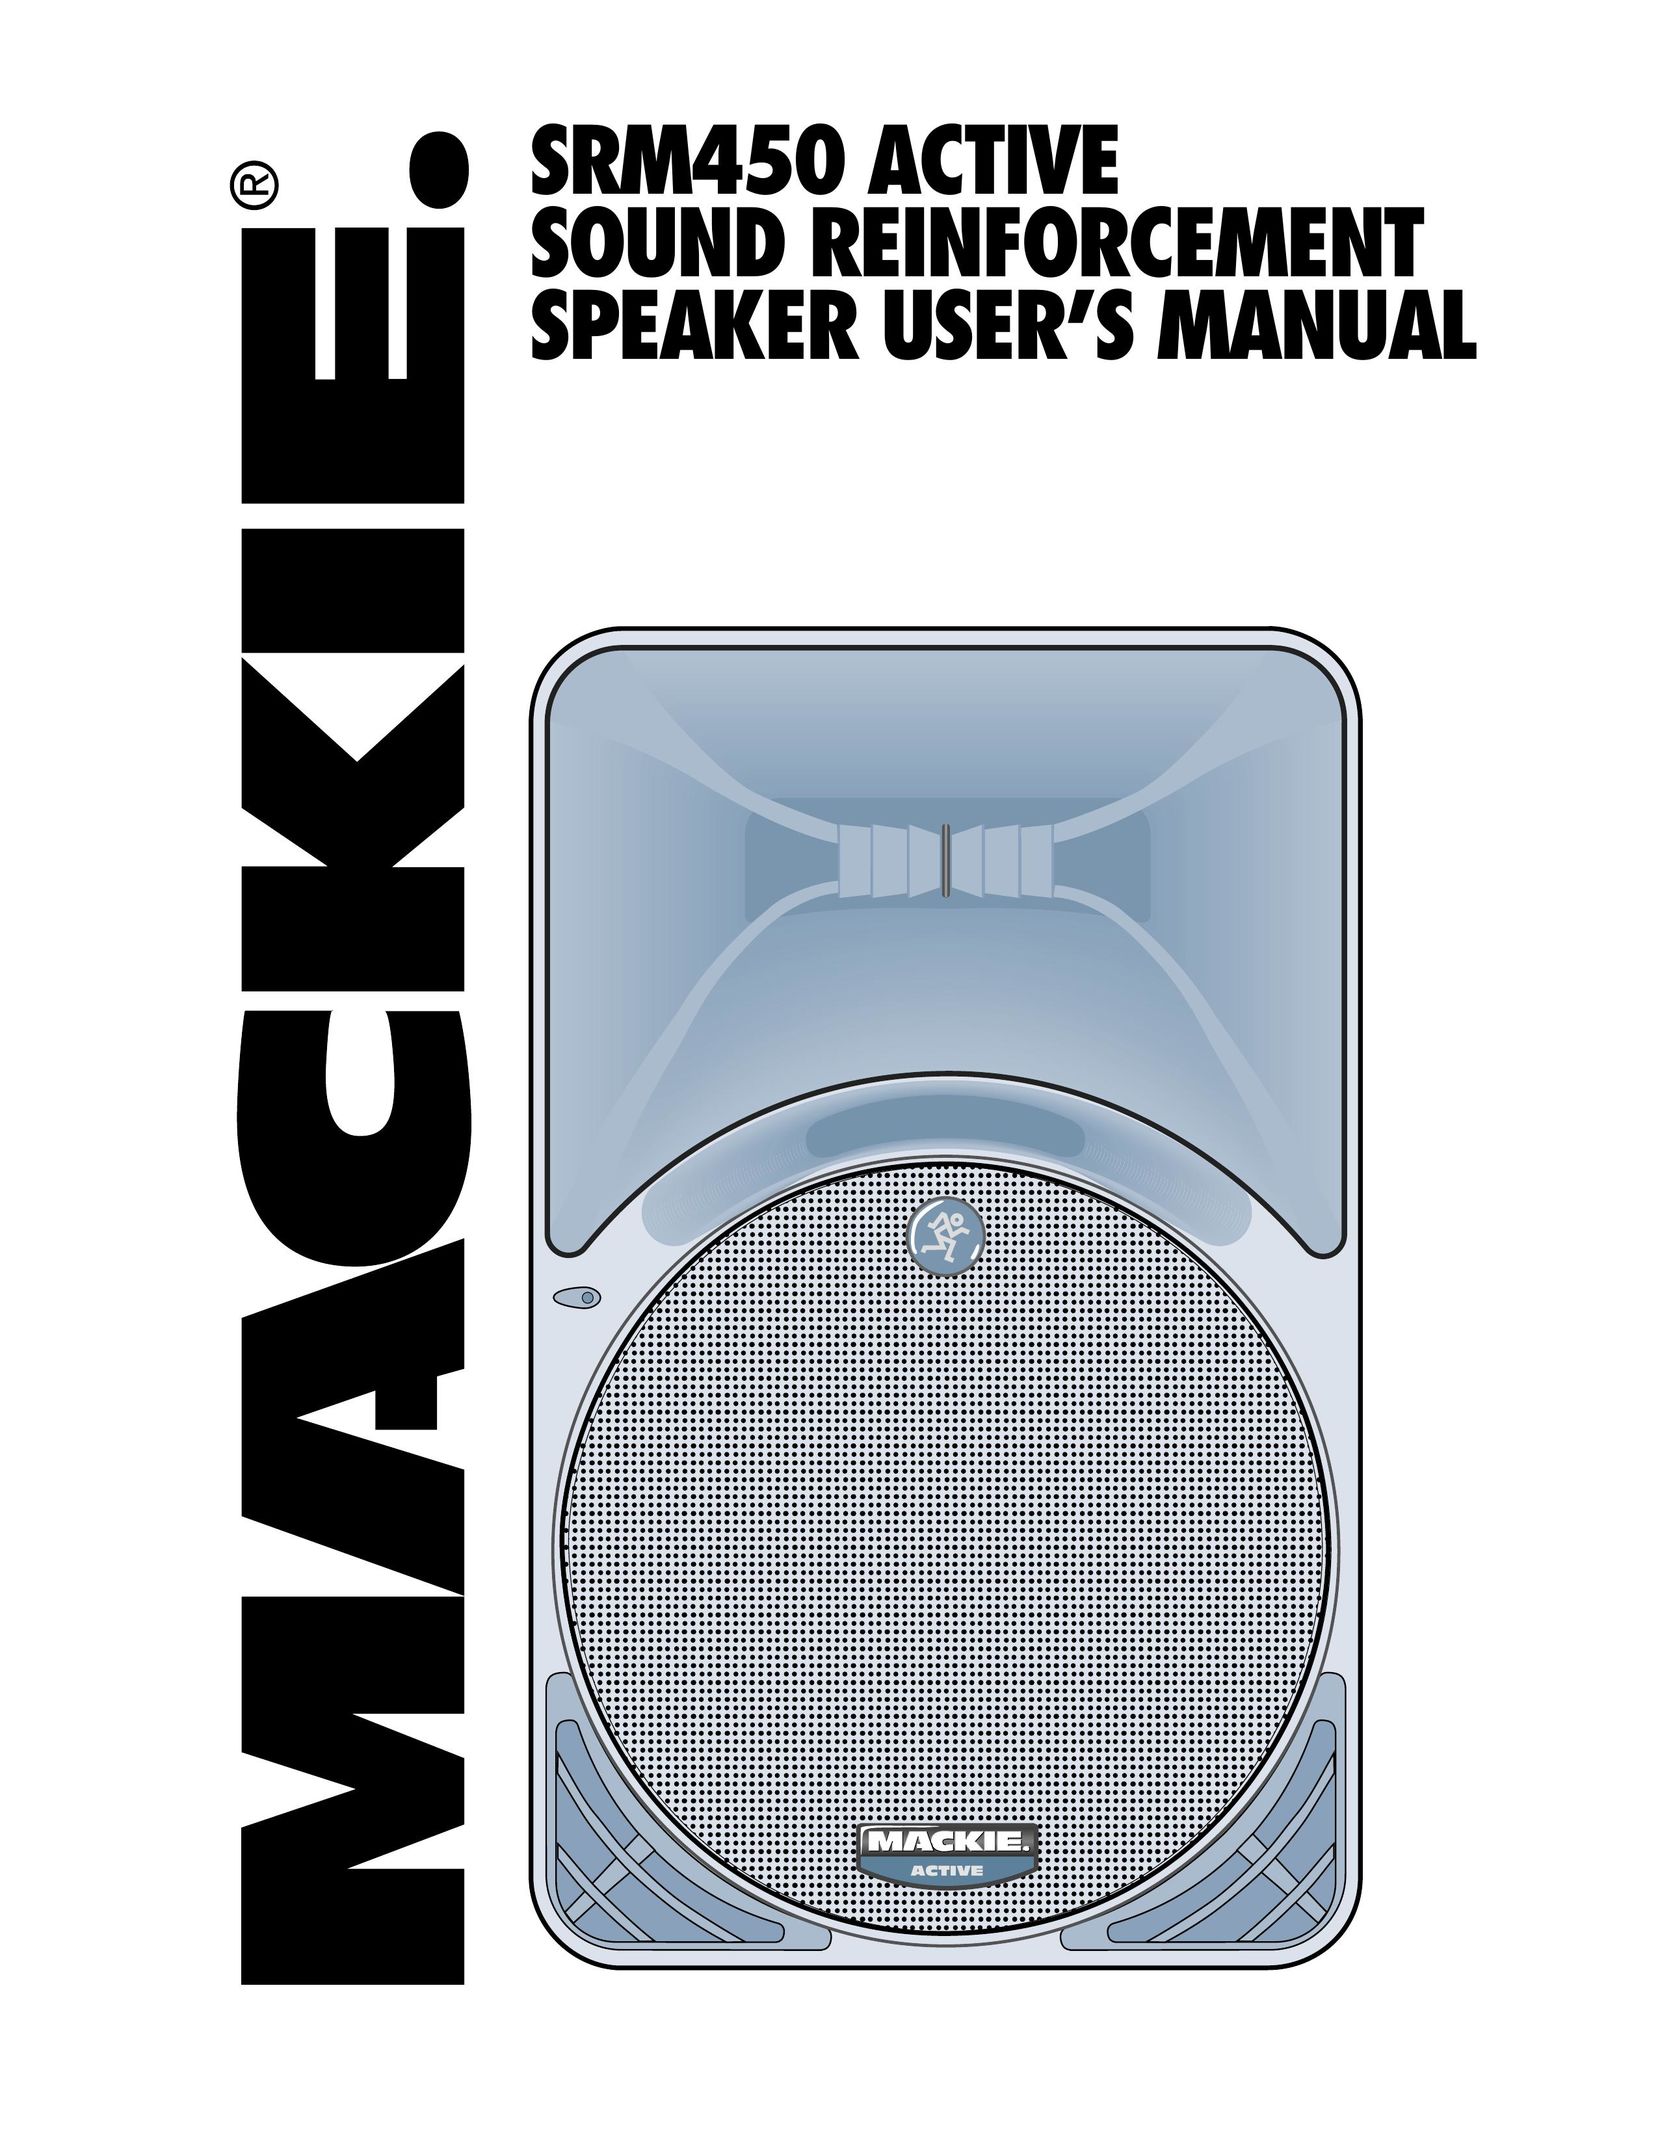 Mackie SRM450 Video Game Sound System User Manual